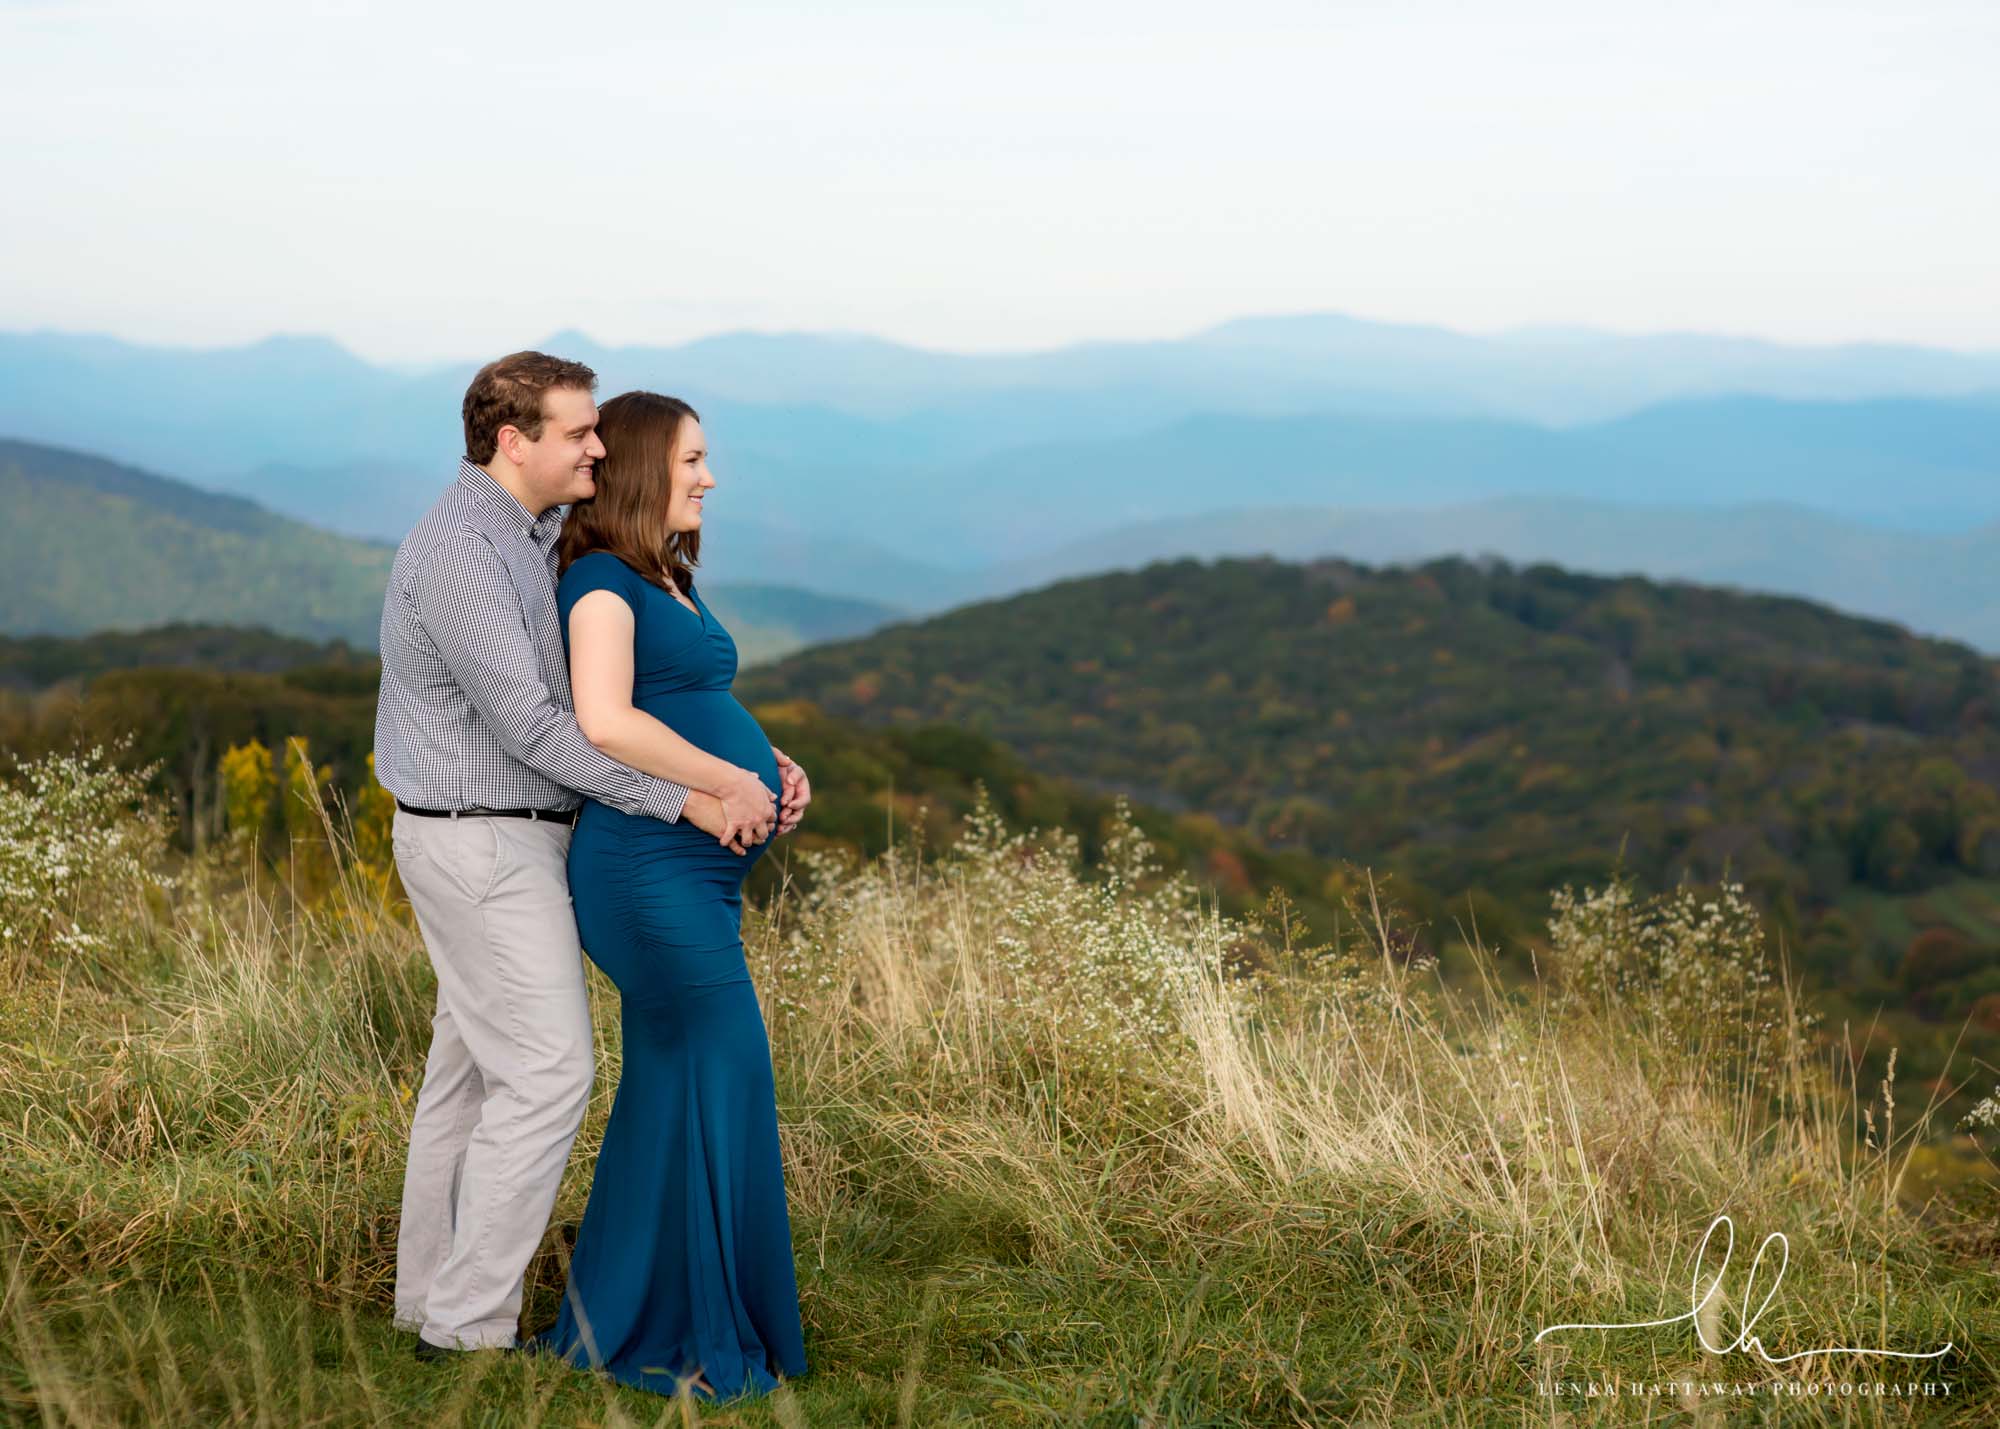 Pregnancy photo from a photo session on a mountain top.